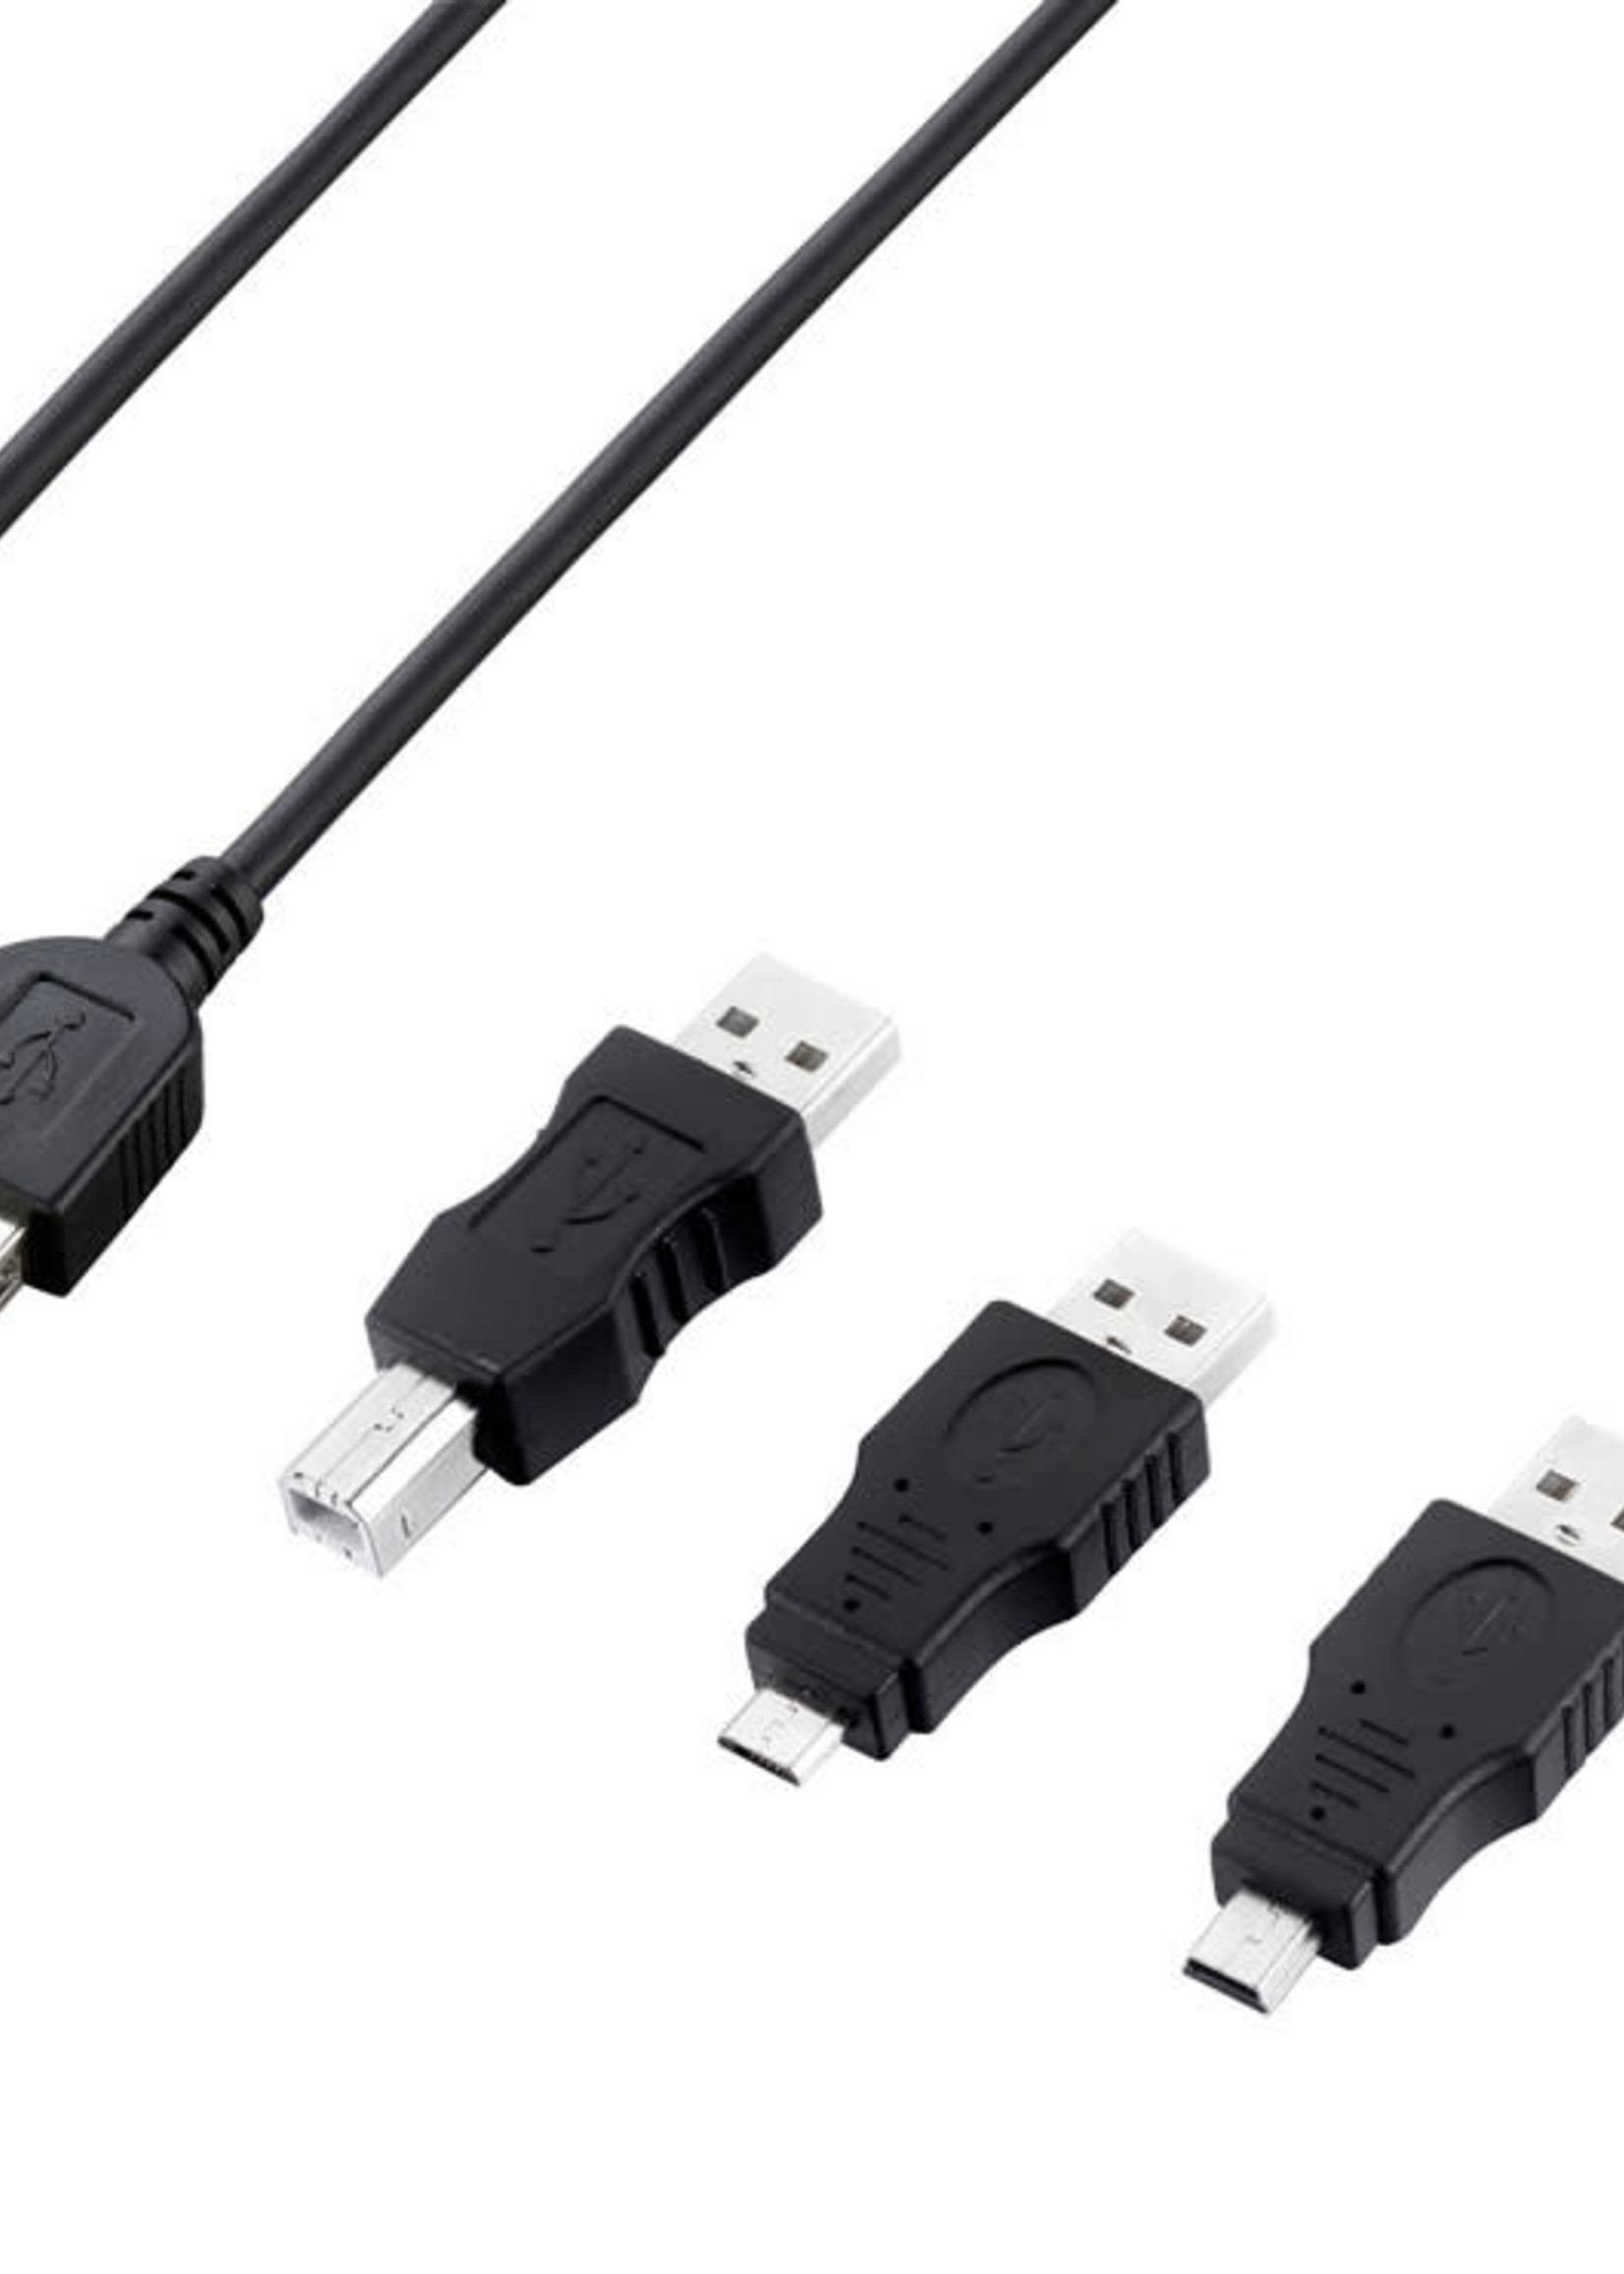 Ross Ross 5 In 1 Usb Connection Kit 1.8m